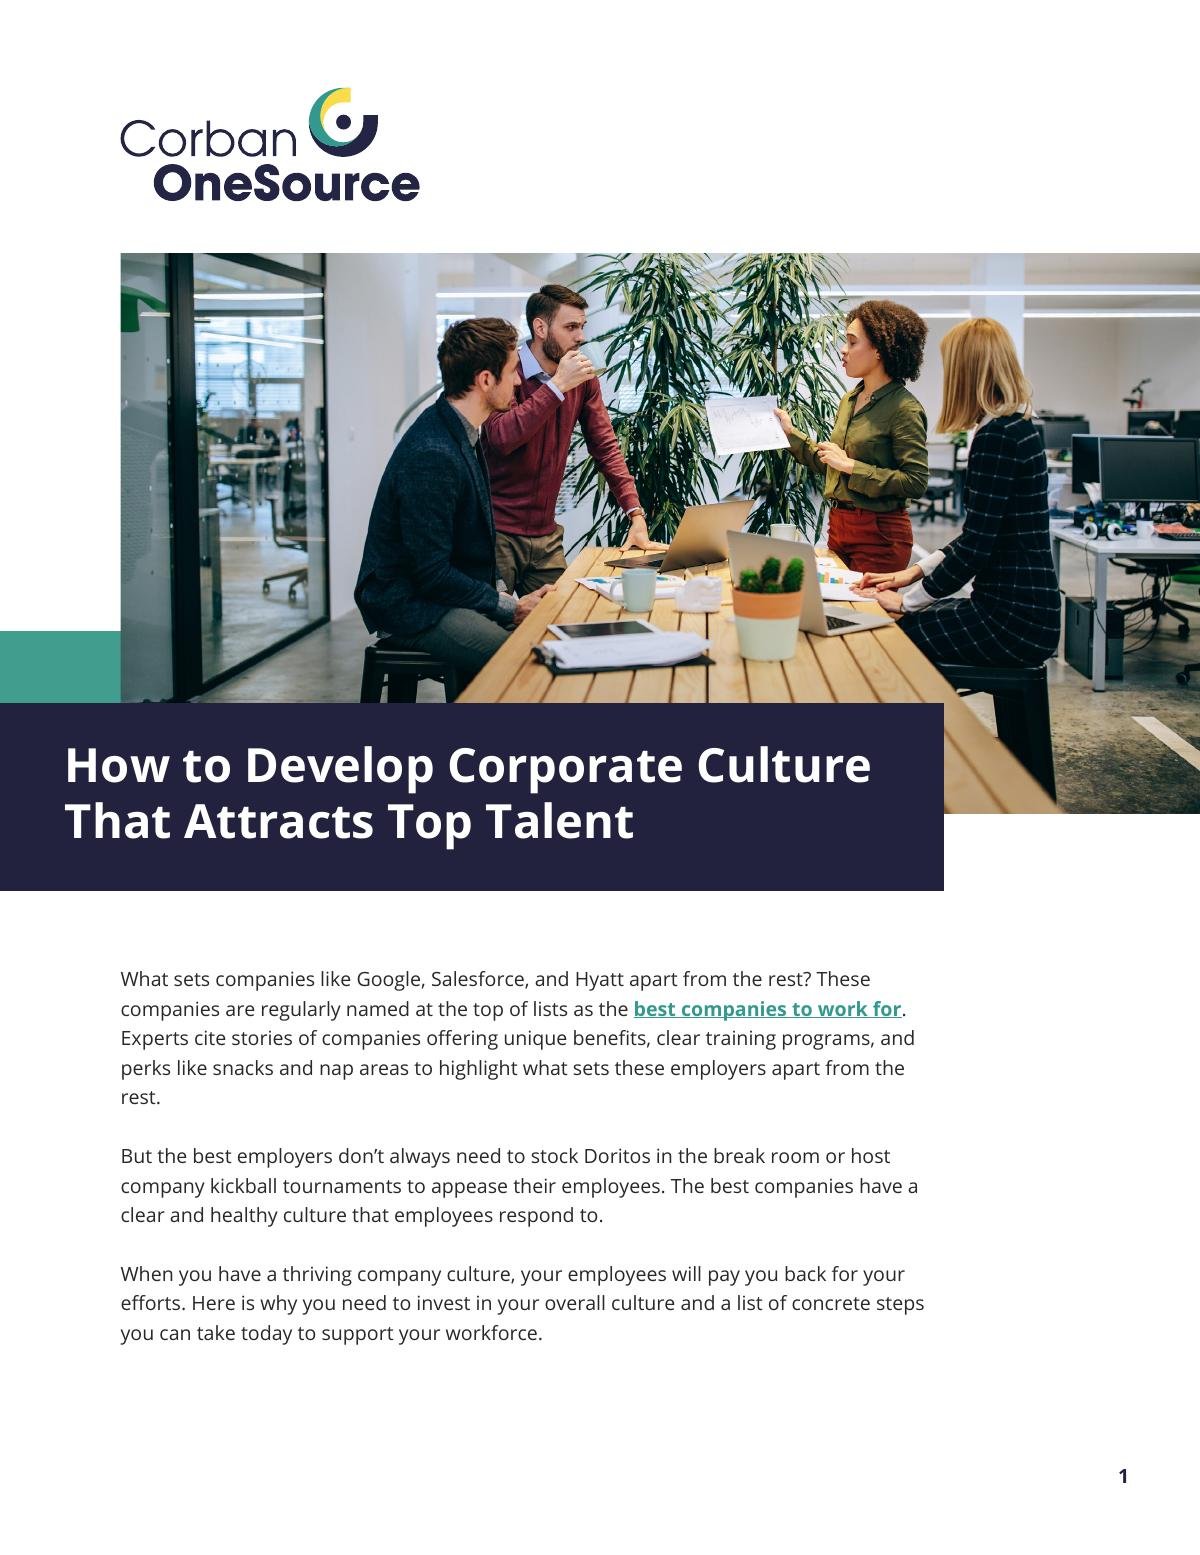 How to Develop Corporate Culture That Attracts Top Talent